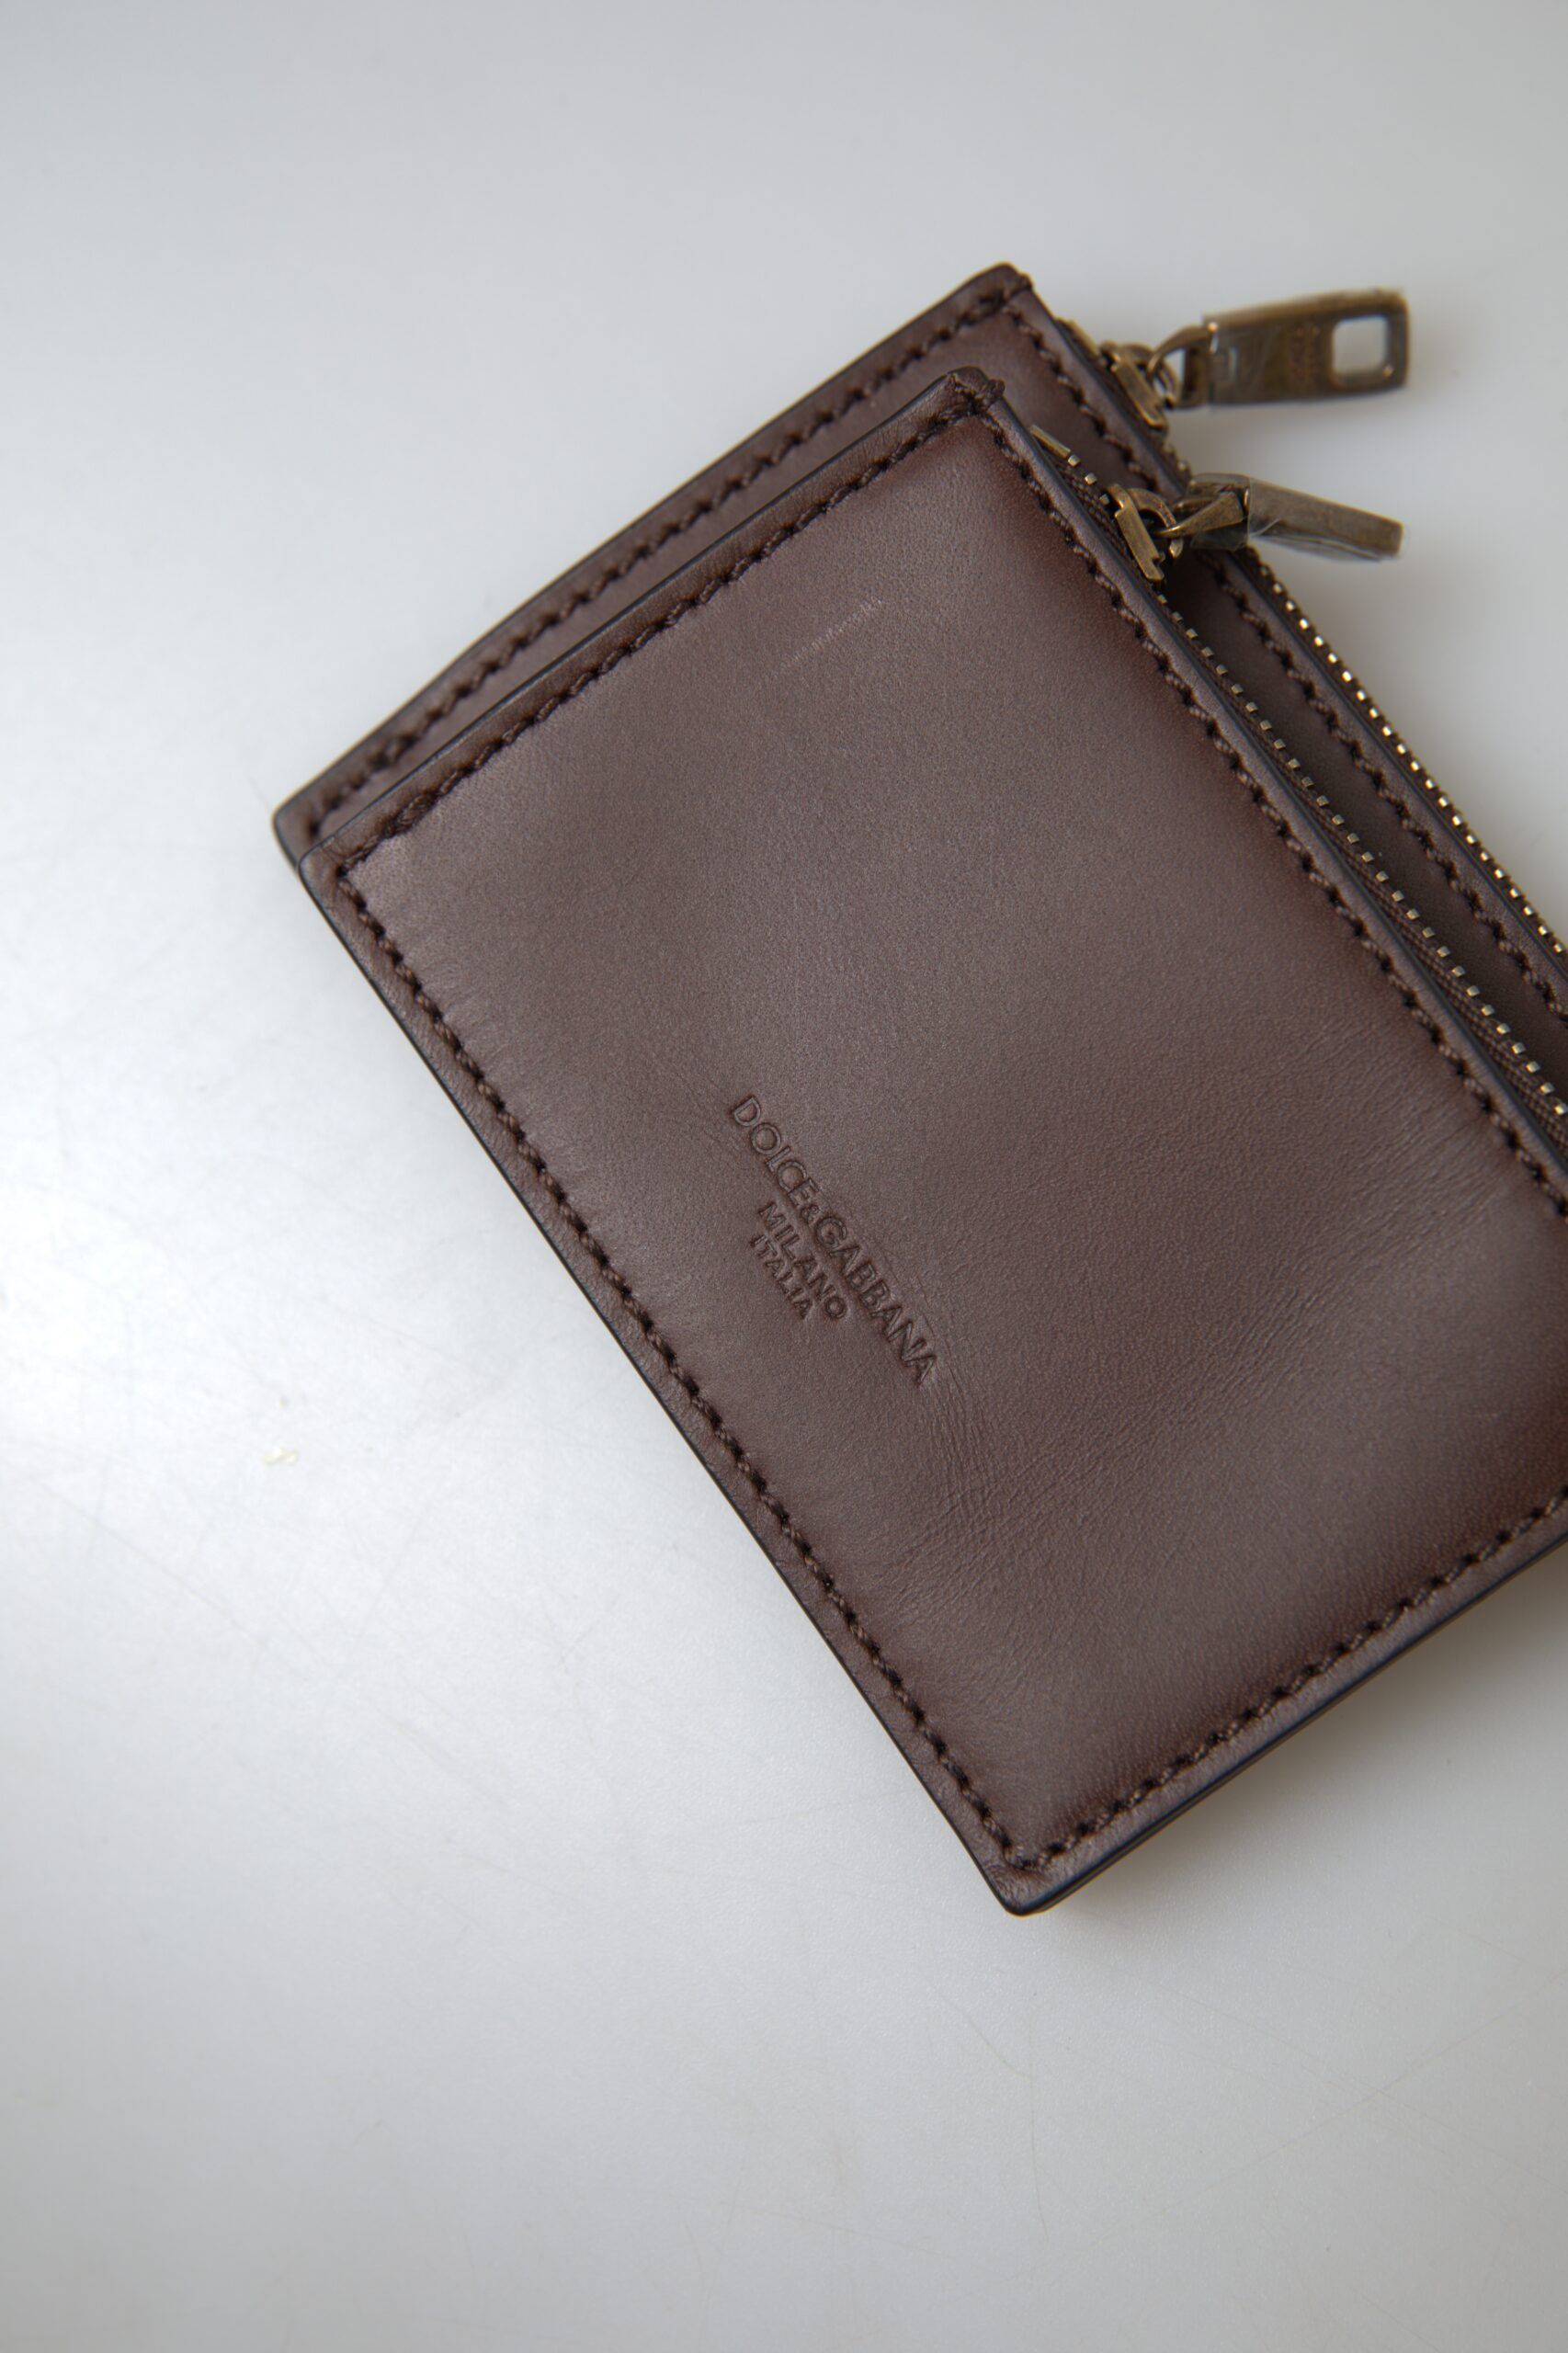 Elegant Brown Leather Coin Purse Wallet